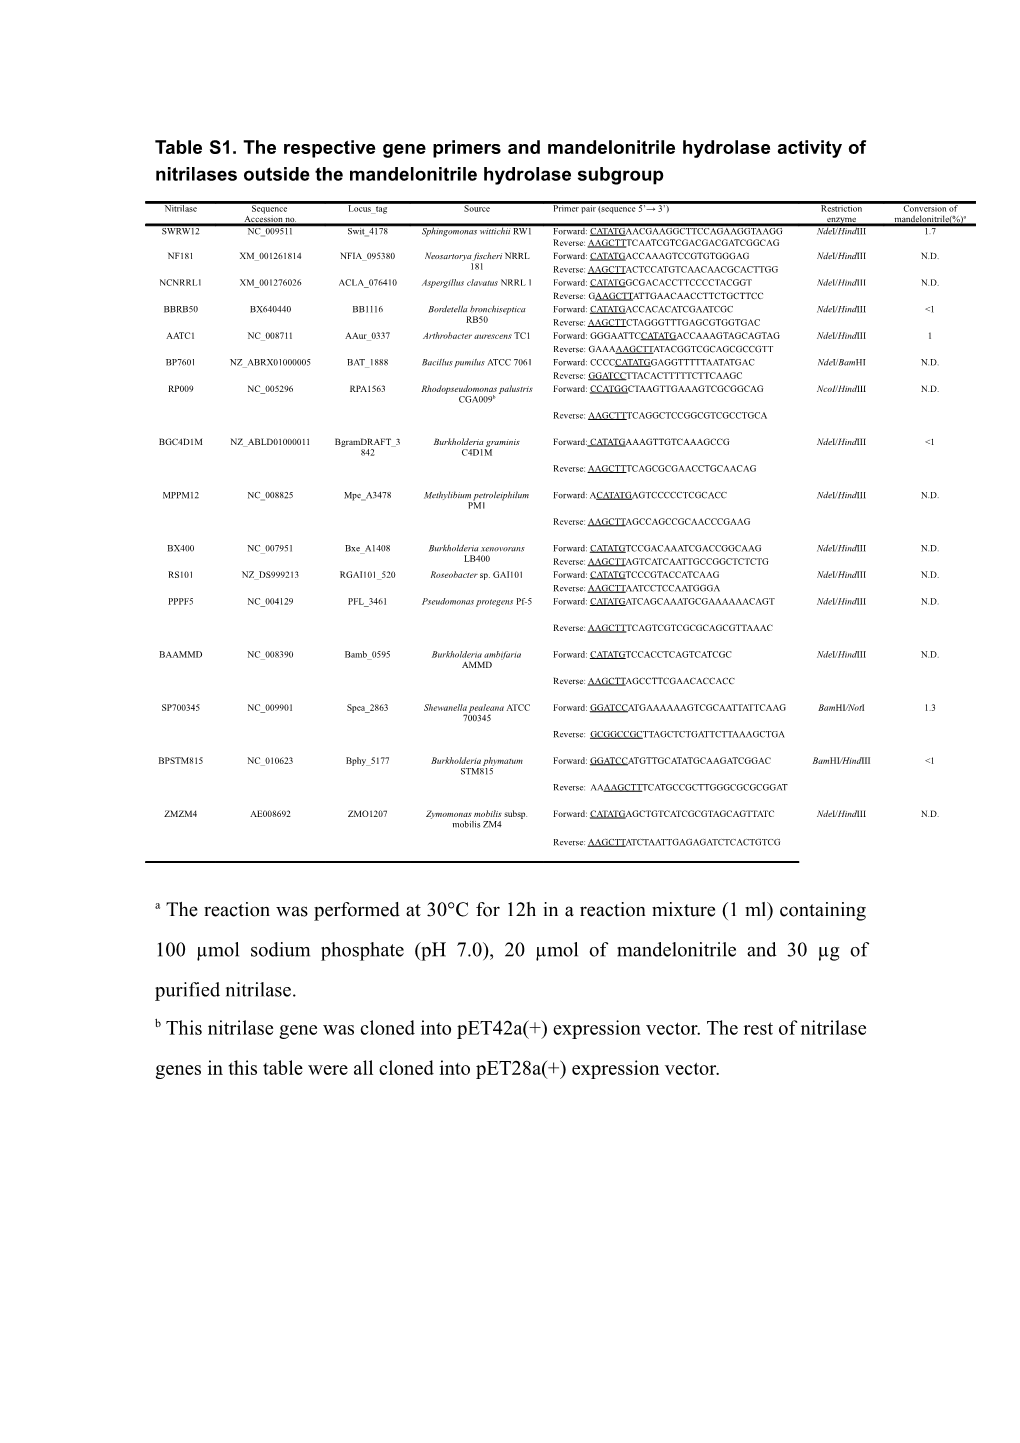 Table S1. the Respective Gene Primers and Mandelonitrile Hydrolase Activity of Nitrilases